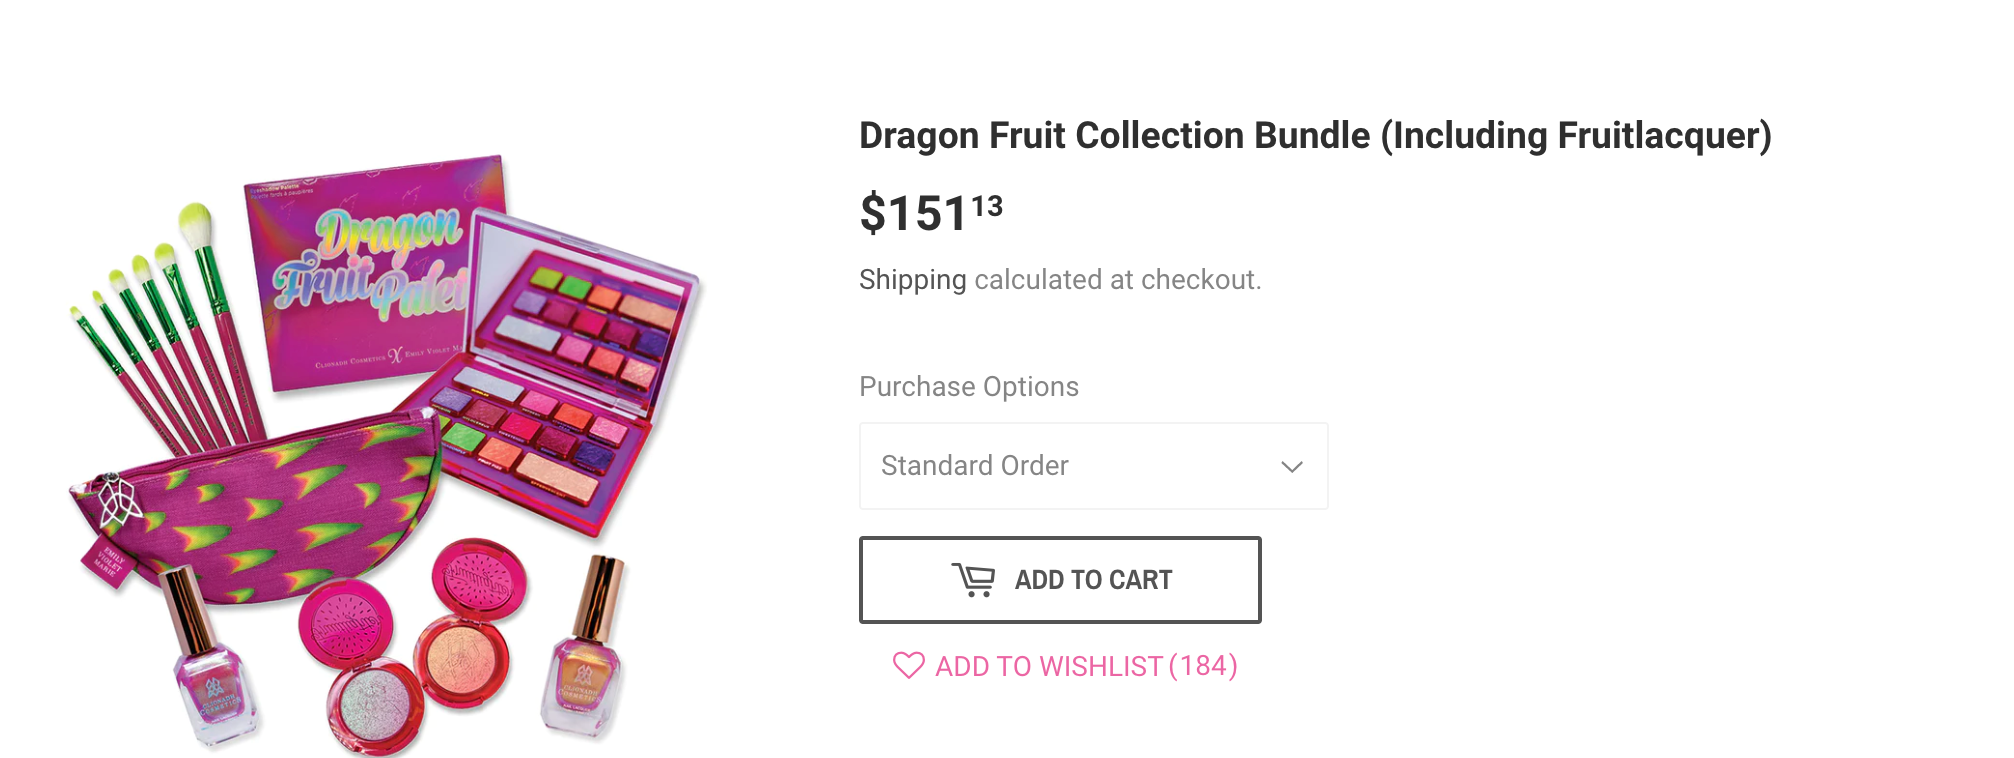 Dragon Fruit Collection